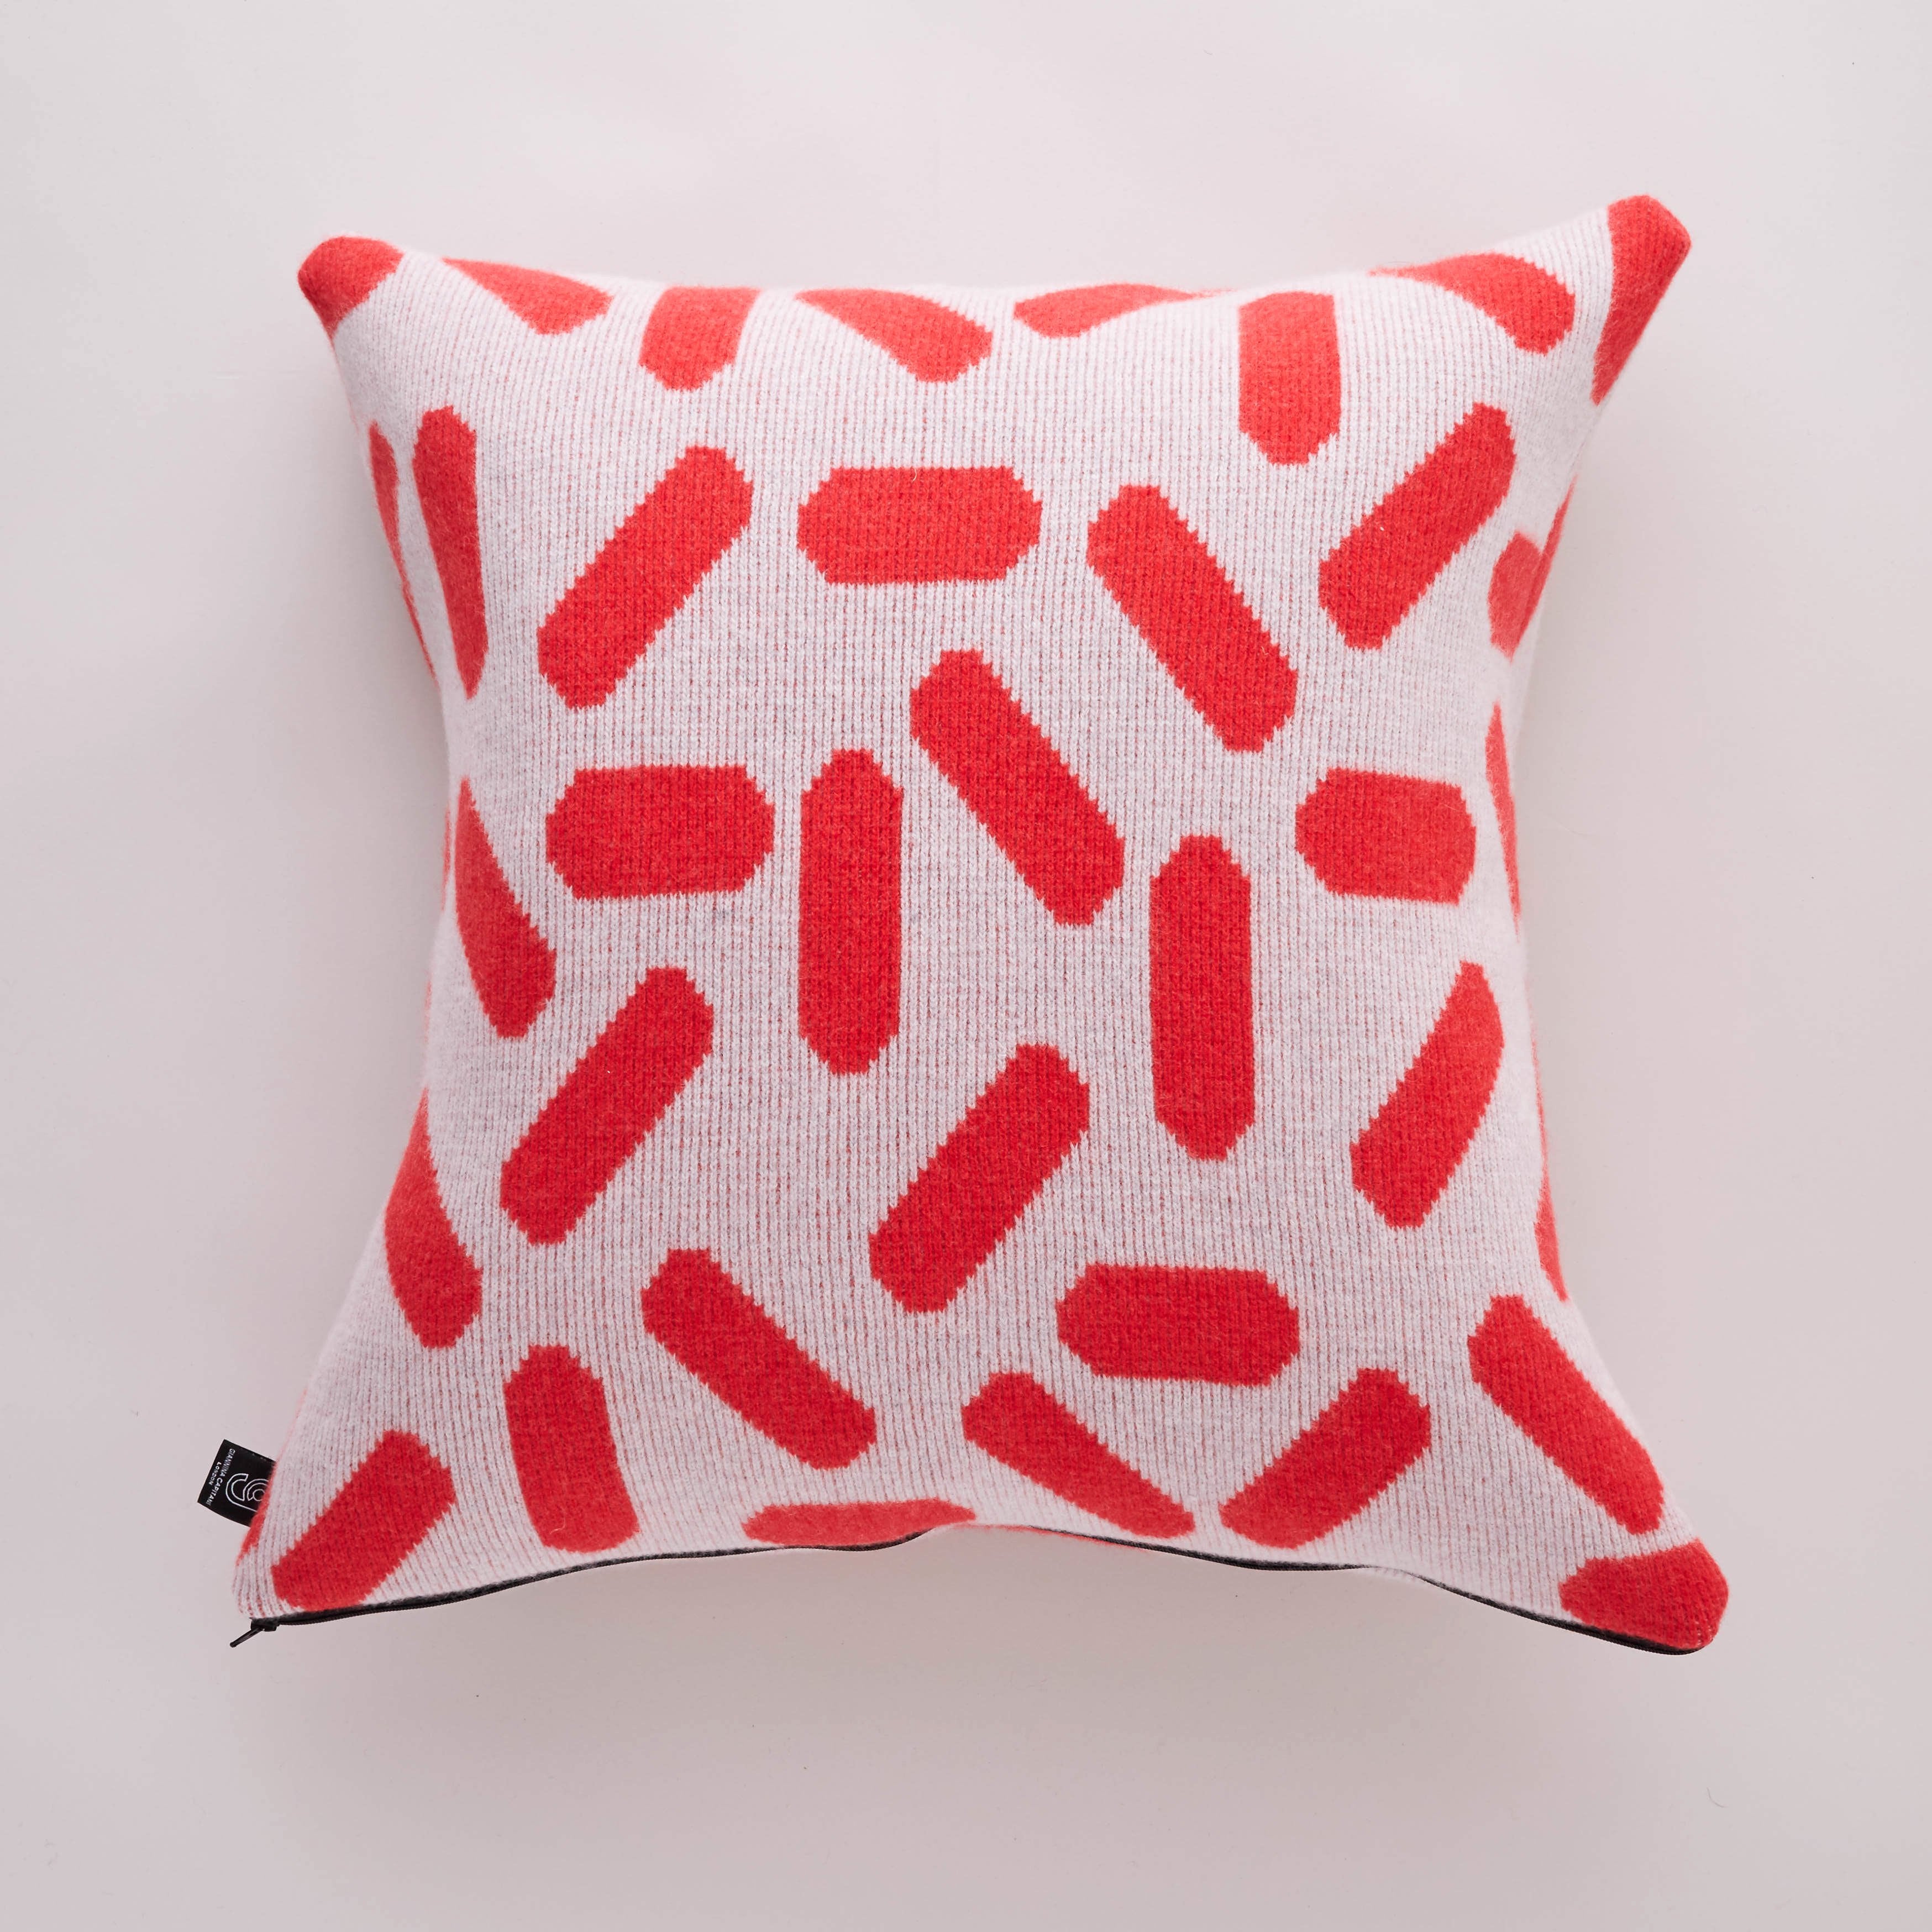 TIC-TAC CUSHION IN GREY AND RED